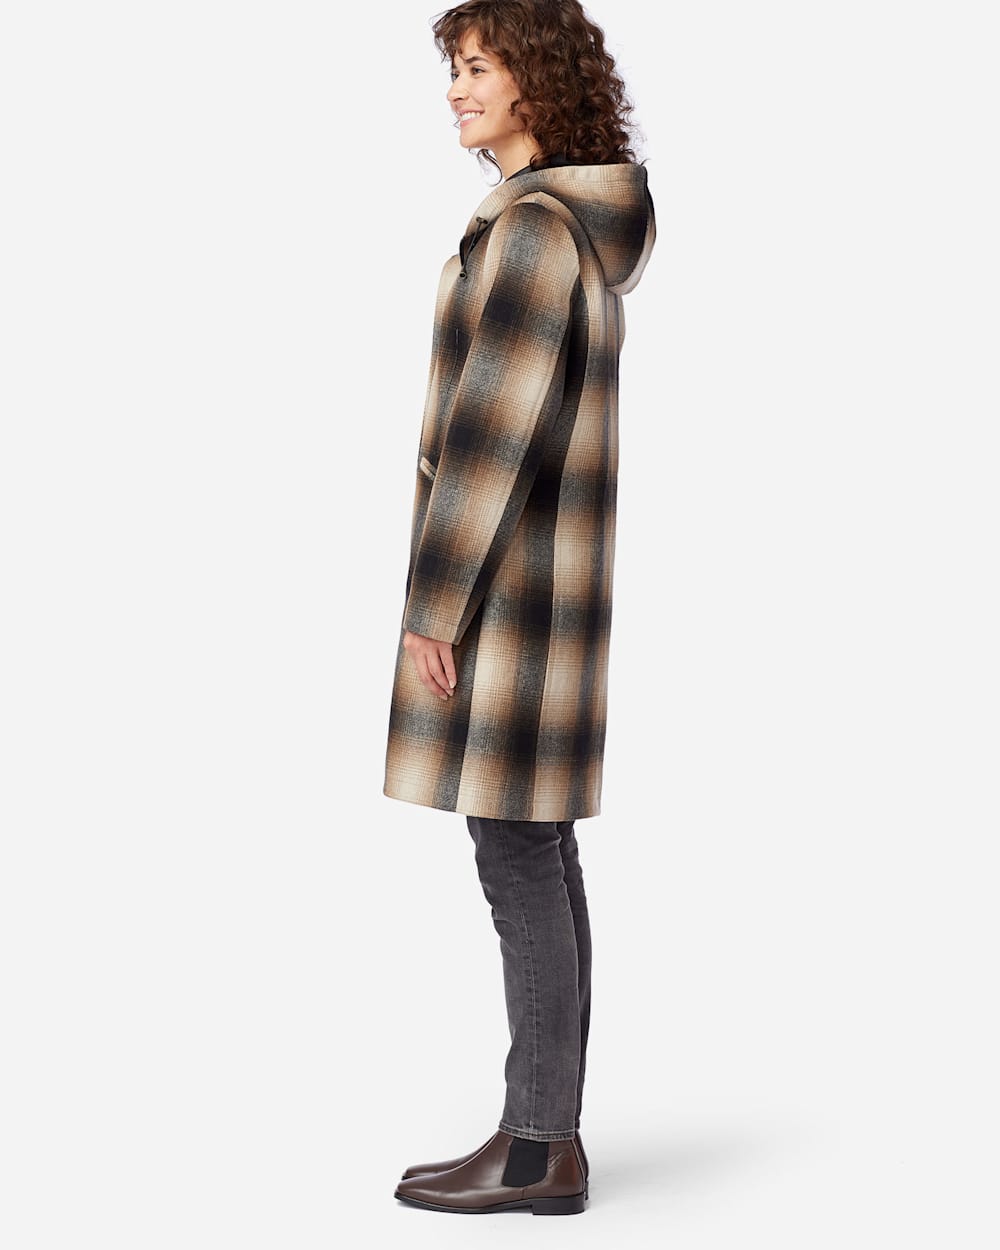 ALTERNATE VIEW OF WOMEN'S STANFORD INSULATED WALKER COAT IN IVORY/BLACK/MOCHA PLAID image number 3